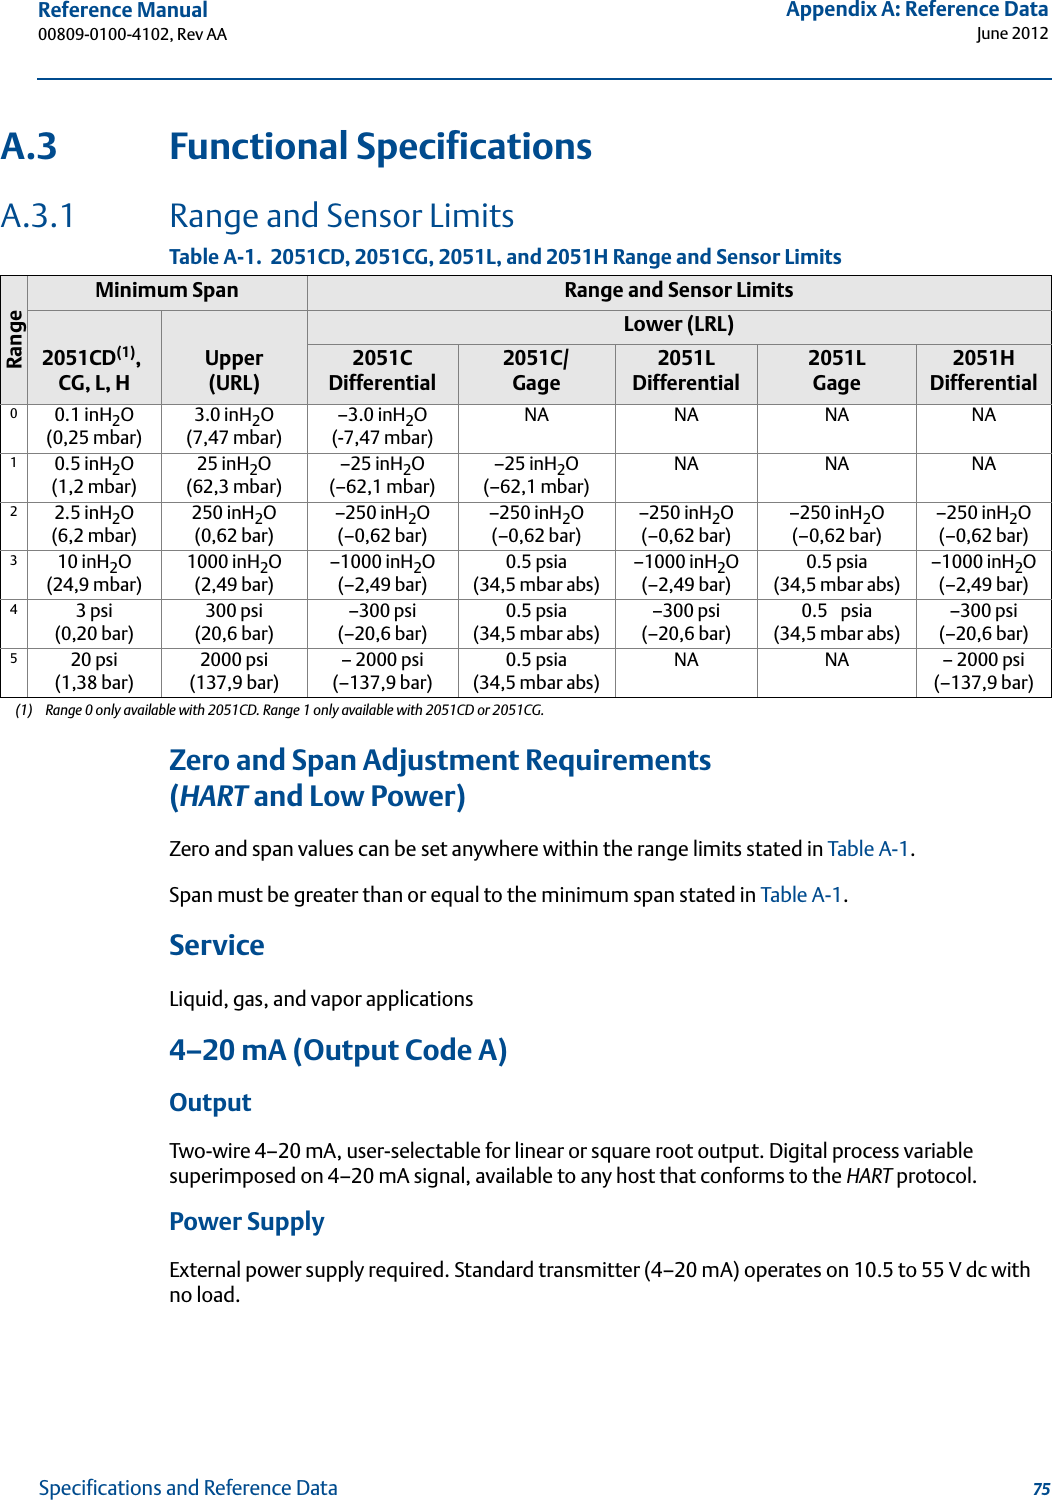 75Reference Manual 00809-0100-4102, Rev AAAppendix A: Reference DataJune 2012Specifications and Reference DataA.3 Functional SpecificationsA.3.1 Range and Sensor LimitsZero and Span Adjustment Requirements(HART and Low Power)Zero and span values can be set anywhere within the range limits stated in Table A-1.Span must be greater than or equal to the minimum span stated in Table A-1.ServiceLiquid, gas, and vapor applications4–20 mA (Output Code A)OutputTwo-wire 4–20 mA, user-selectable for linear or square root output. Digital process variable superimposed on 4–20 mA signal, available to any host that conforms to the HART protocol.Power SupplyExternal power supply required. Standard transmitter (4–20 mA) operates on 10.5 to 55 V dc with no load.Table A-1.  2051CD, 2051CG, 2051L, and 2051H Range and Sensor LimitsRangeMinimum Span Range and Sensor Limits2051CD(1), CG, L, H(1) Range 0 only available with 2051CD. Range 1 only available with 2051CD or 2051CG.Upper (URL)Lower (LRL) 2051C Differential2051C/Gage2051L Differential2051LGage2051HDifferential 00.1 inH2O(0,25 mbar)3.0 inH2O(7,47 mbar)–3.0 inH2O(-7,47 mbar)NA NA NA NA10.5 inH2O(1,2 mbar)25 inH2O(62,3 mbar)–25 inH2O(–62,1 mbar)–25 inH2O(–62,1 mbar)NA NA NA22.5 inH2O (6,2 mbar)250 inH2O(0,62 bar)–250 inH2O(–0,62 bar)–250 inH2O(–0,62 bar) –250 inH2O(–0,62 bar)–250 inH2O(–0,62 bar)–250 inH2O(–0,62 bar)310 inH2O (24,9 mbar)1000 inH2O (2,49 bar)–1000 inH2O (–2,49 bar)0.5 psia   (34,5 mbar abs)–1000 inH2O (–2,49 bar)0.5 psia(34,5 mbar abs)–1000 inH2O (–2,49 bar)43 psi (0,20 bar)300 psi (20,6 bar)–300 psi(–20,6 bar)0.5 psia   (34,5 mbar abs)–300 psi(–20,6 bar)0.5 psia(34,5 mbar abs)–300 psi (–20,6 bar)520 psi (1,38 bar)2000 psi (137,9 bar)– 2000 psi(–137,9 bar)0.5 psia(34,5 mbar abs)NA NA – 2000 psi (–137,9 bar)